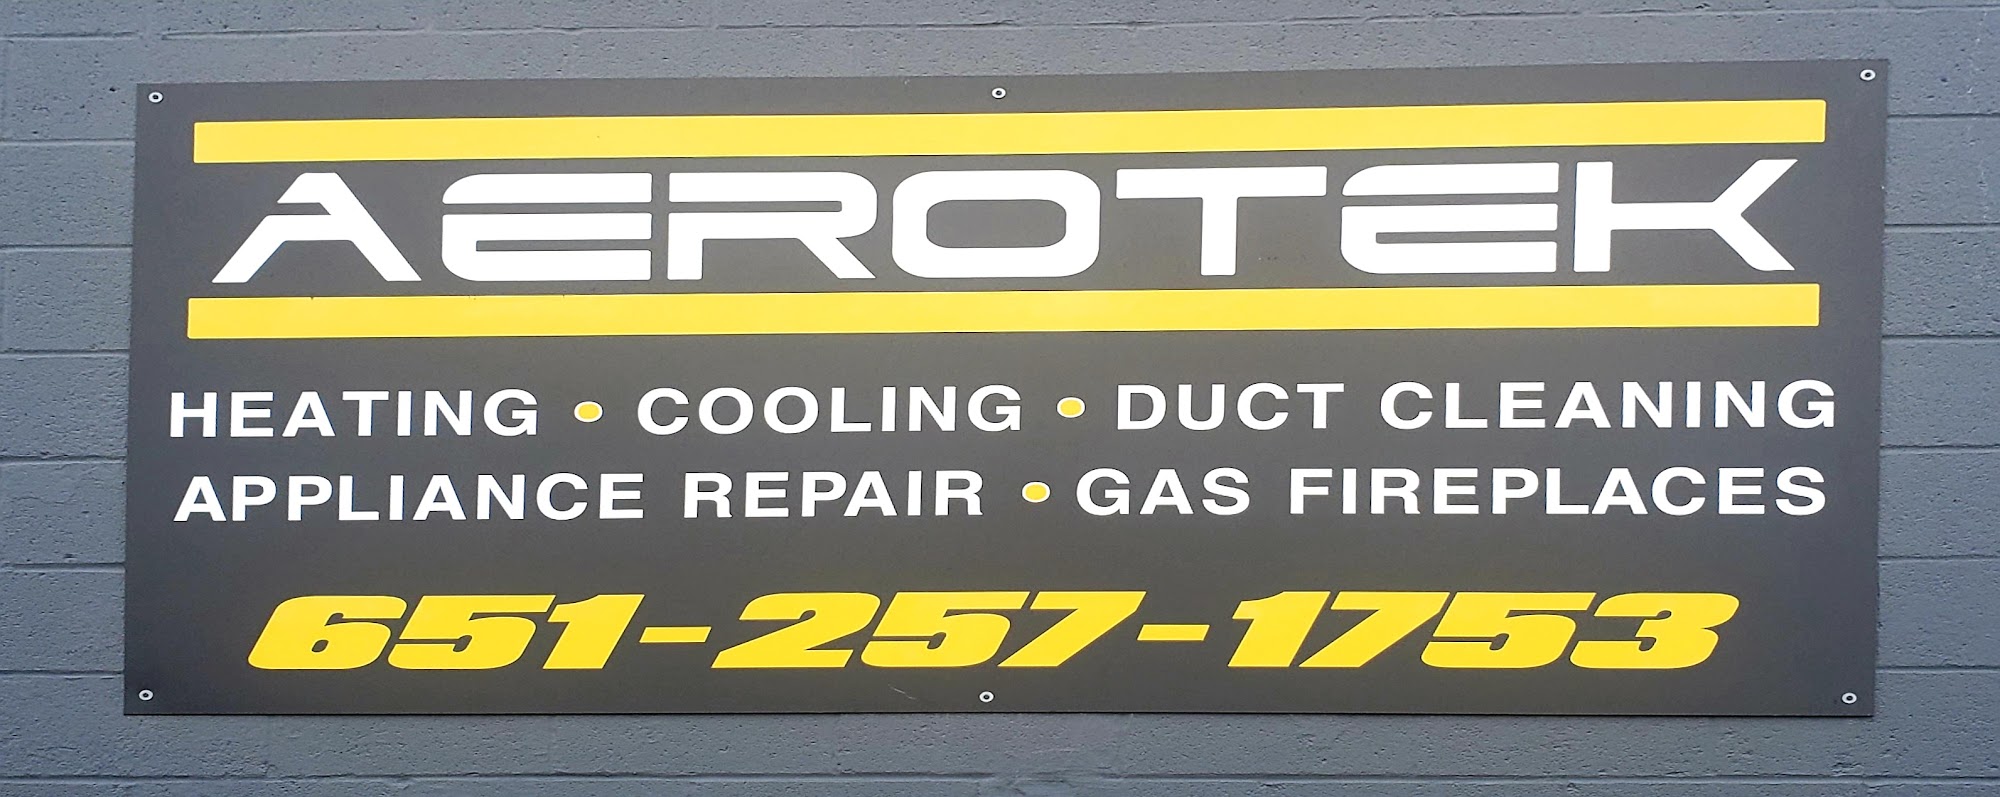 Aerotek Heating, Cooling & Duct Cleaning 13245 Andrews Ave, Lindstrom Minnesota 55045